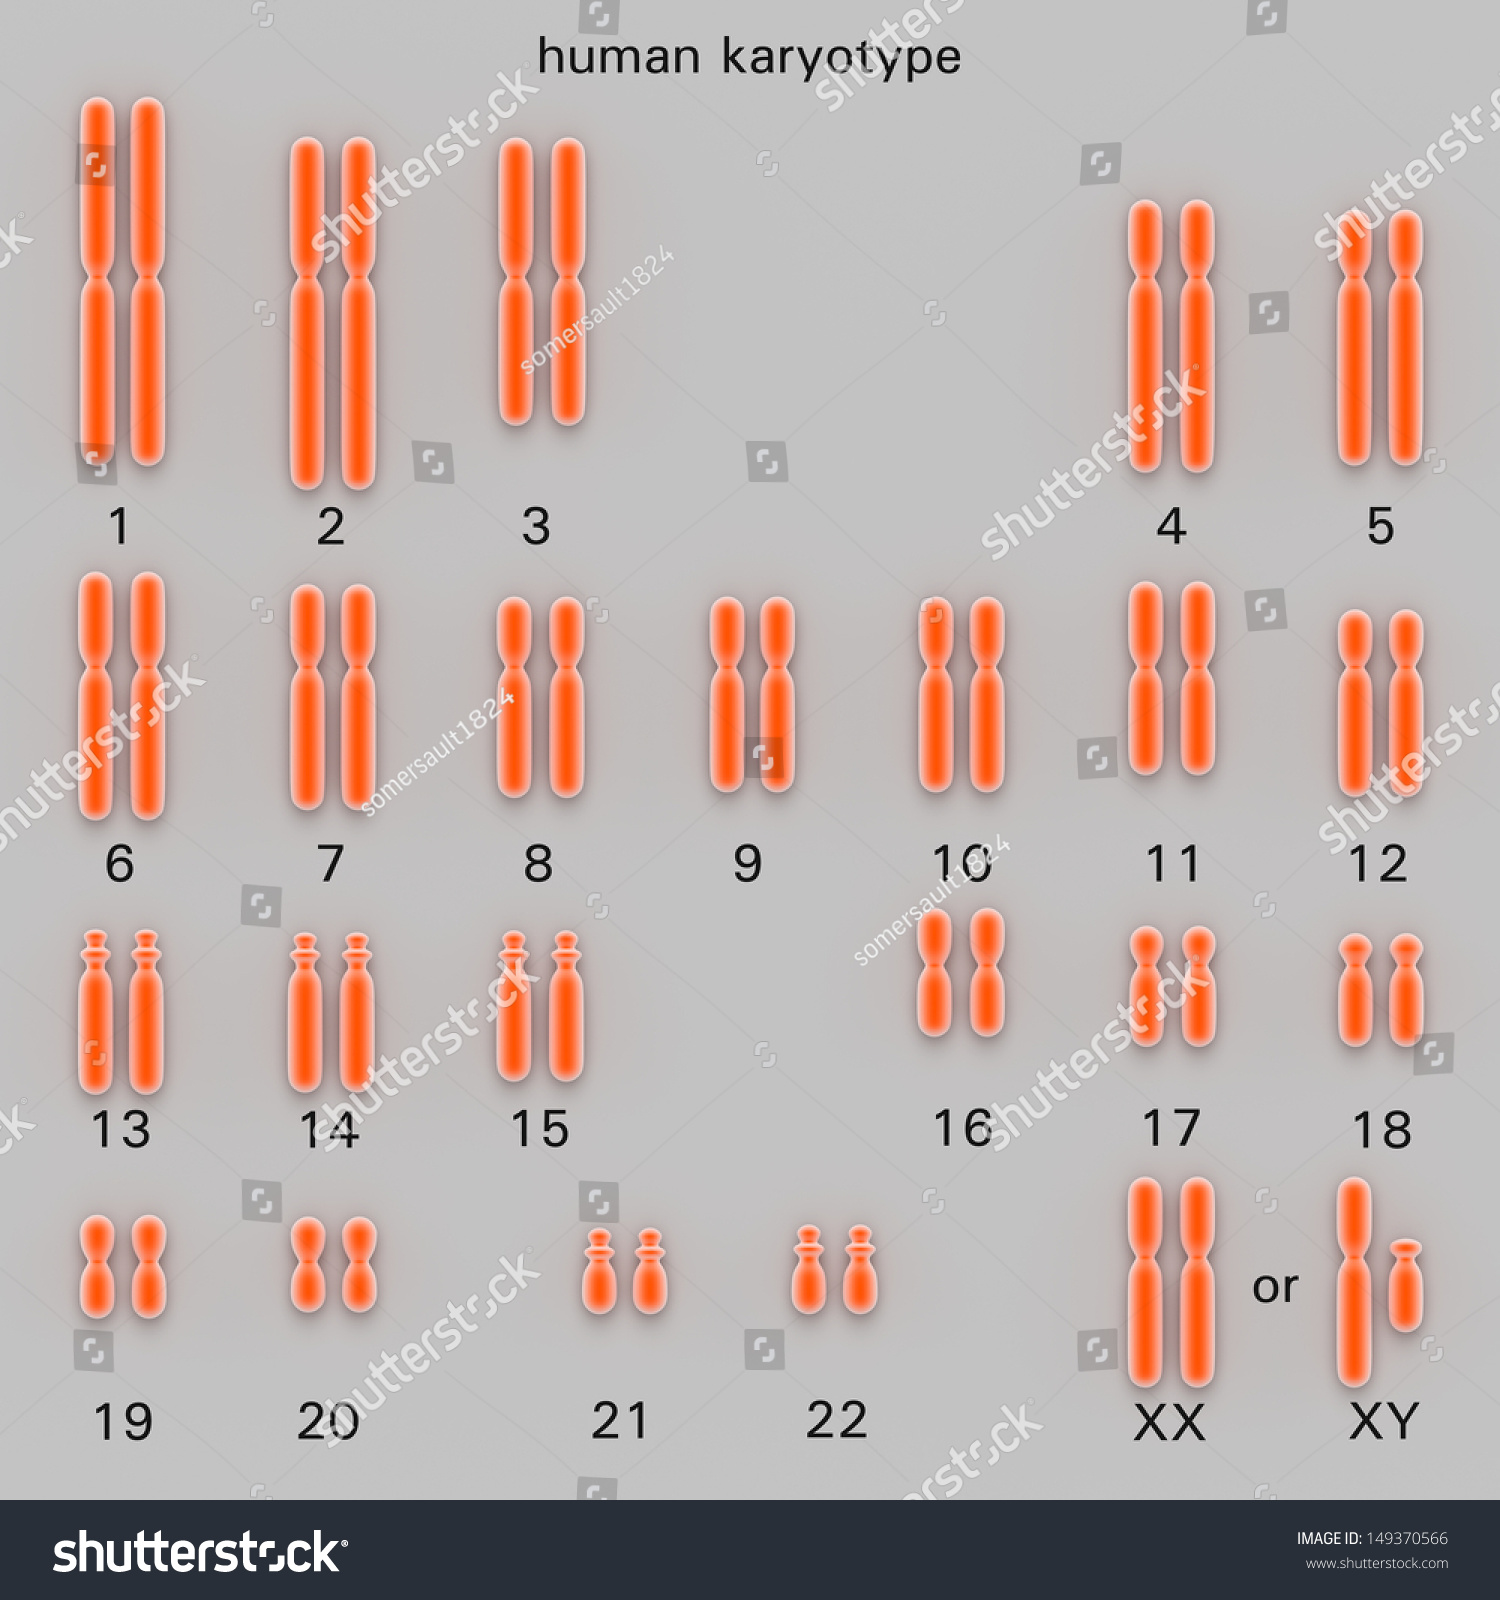 Normal Human Karyotype Which Is The Diploid Pairing Of The Chromosomes Dependant Upon Their 5910